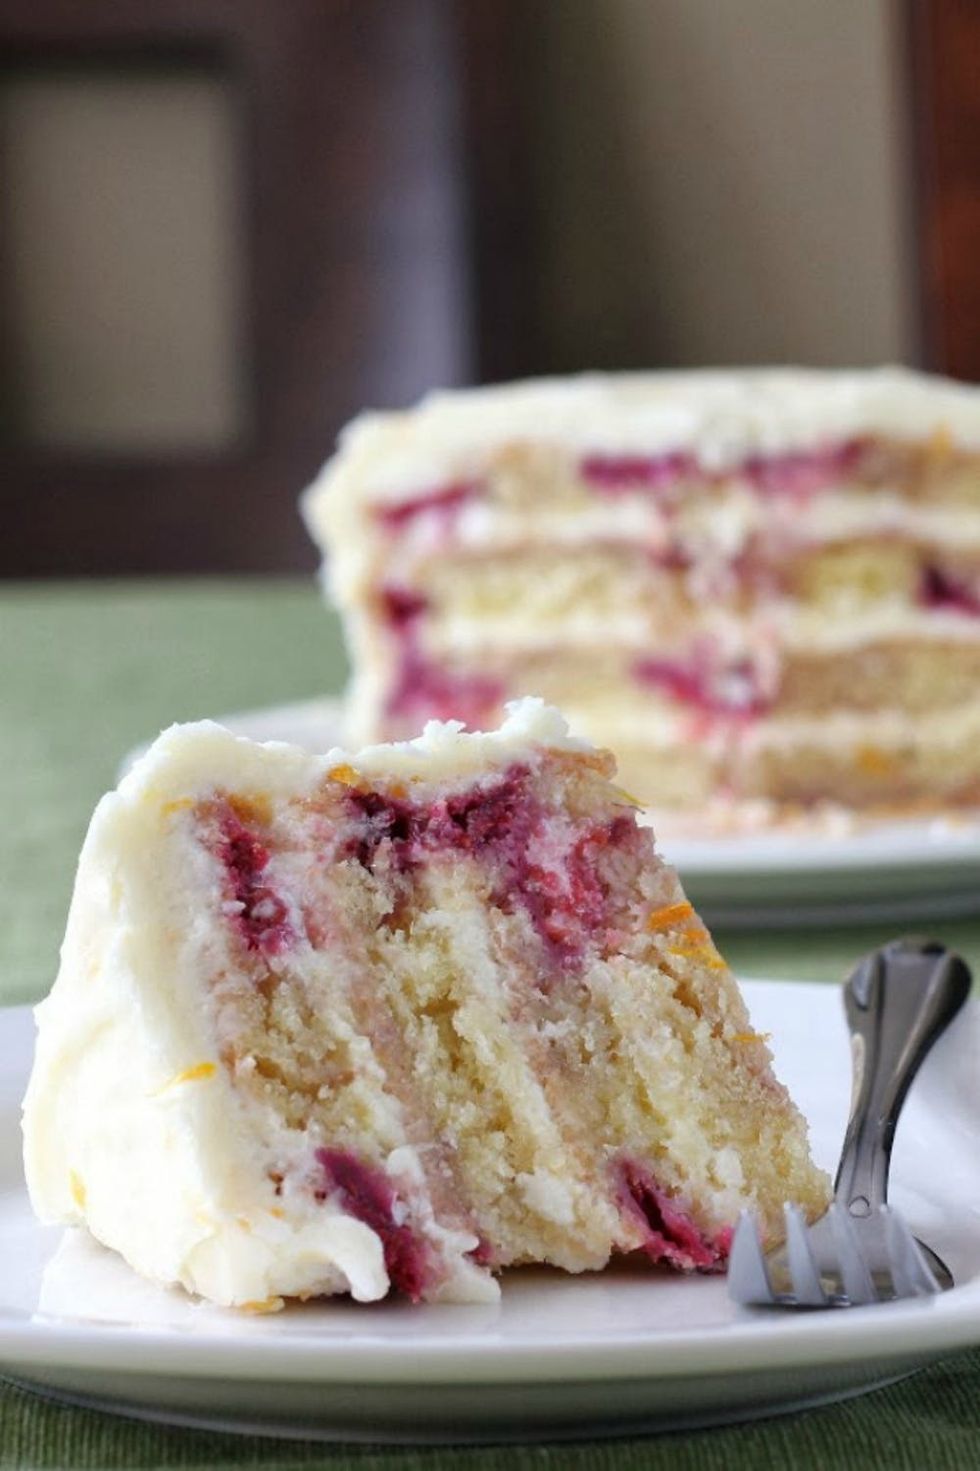 19 Delicious Cakes That Pack a Protein Punch Thanks to Yogurt - Brit + Co